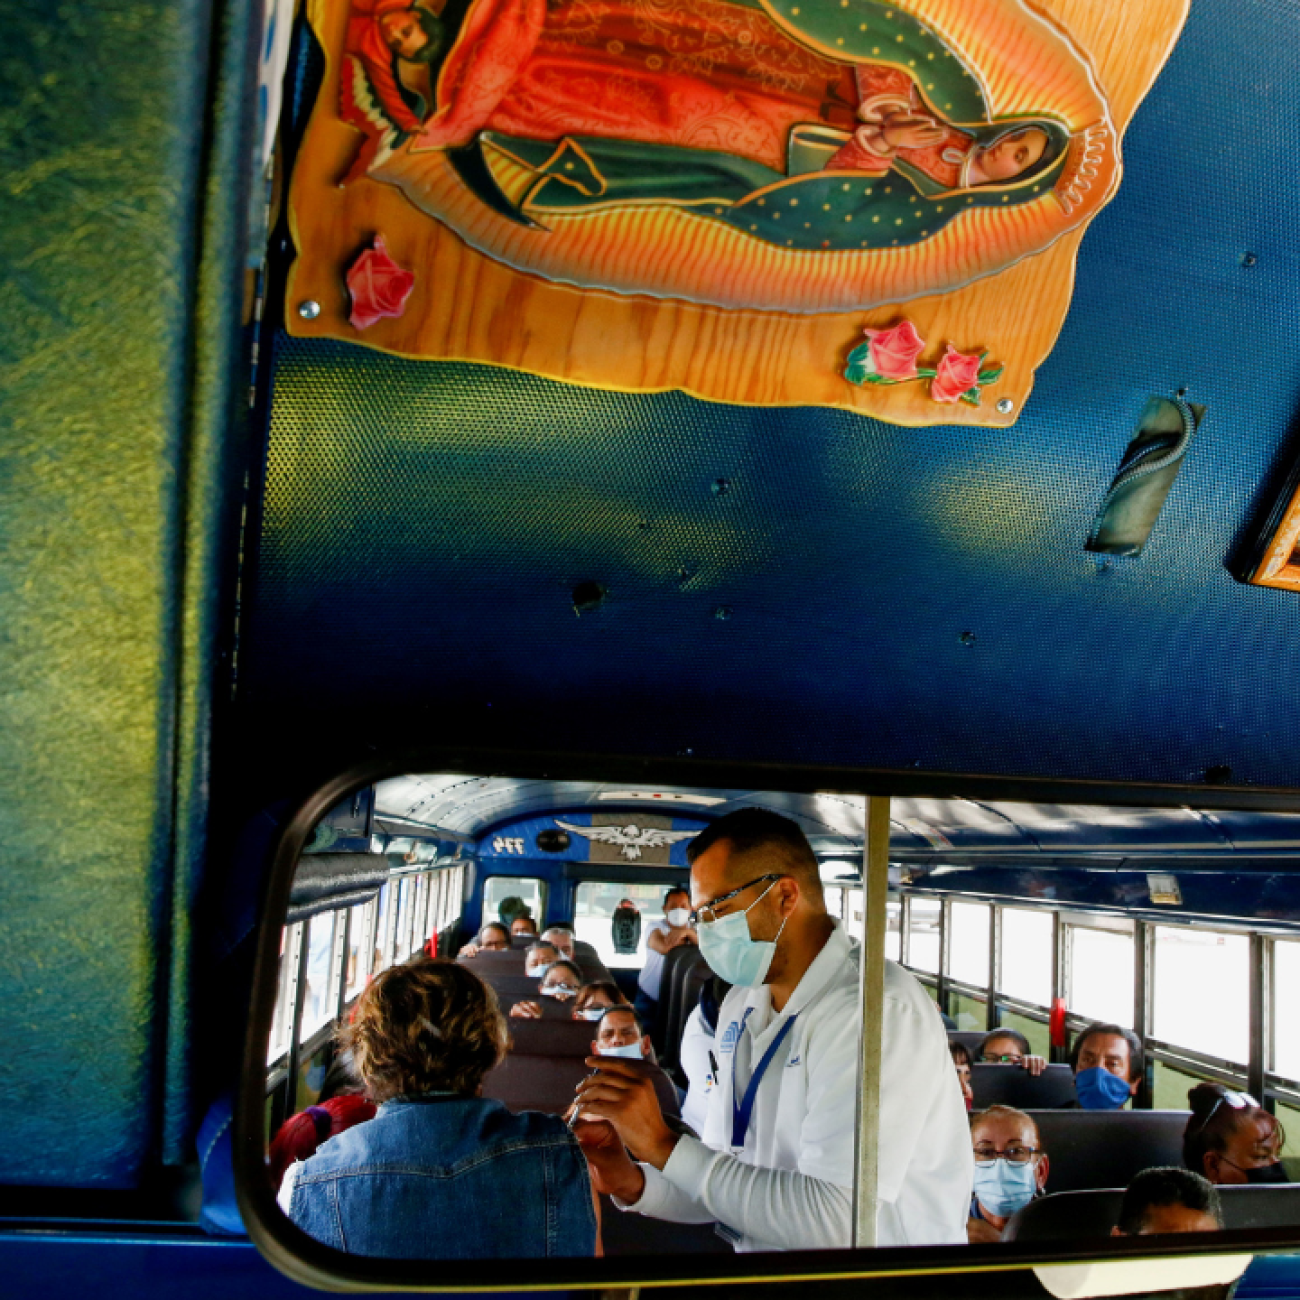 A rearview mirroron a bus reflects the image of assembly factory employees sitting in the bus waiting to receive COVID-19 vaccines. A health worker in a white medical coat is giving a vaccine to one of the women. Photo taken in Ciudad Juarez, Mexico, on May 24, 2021. 